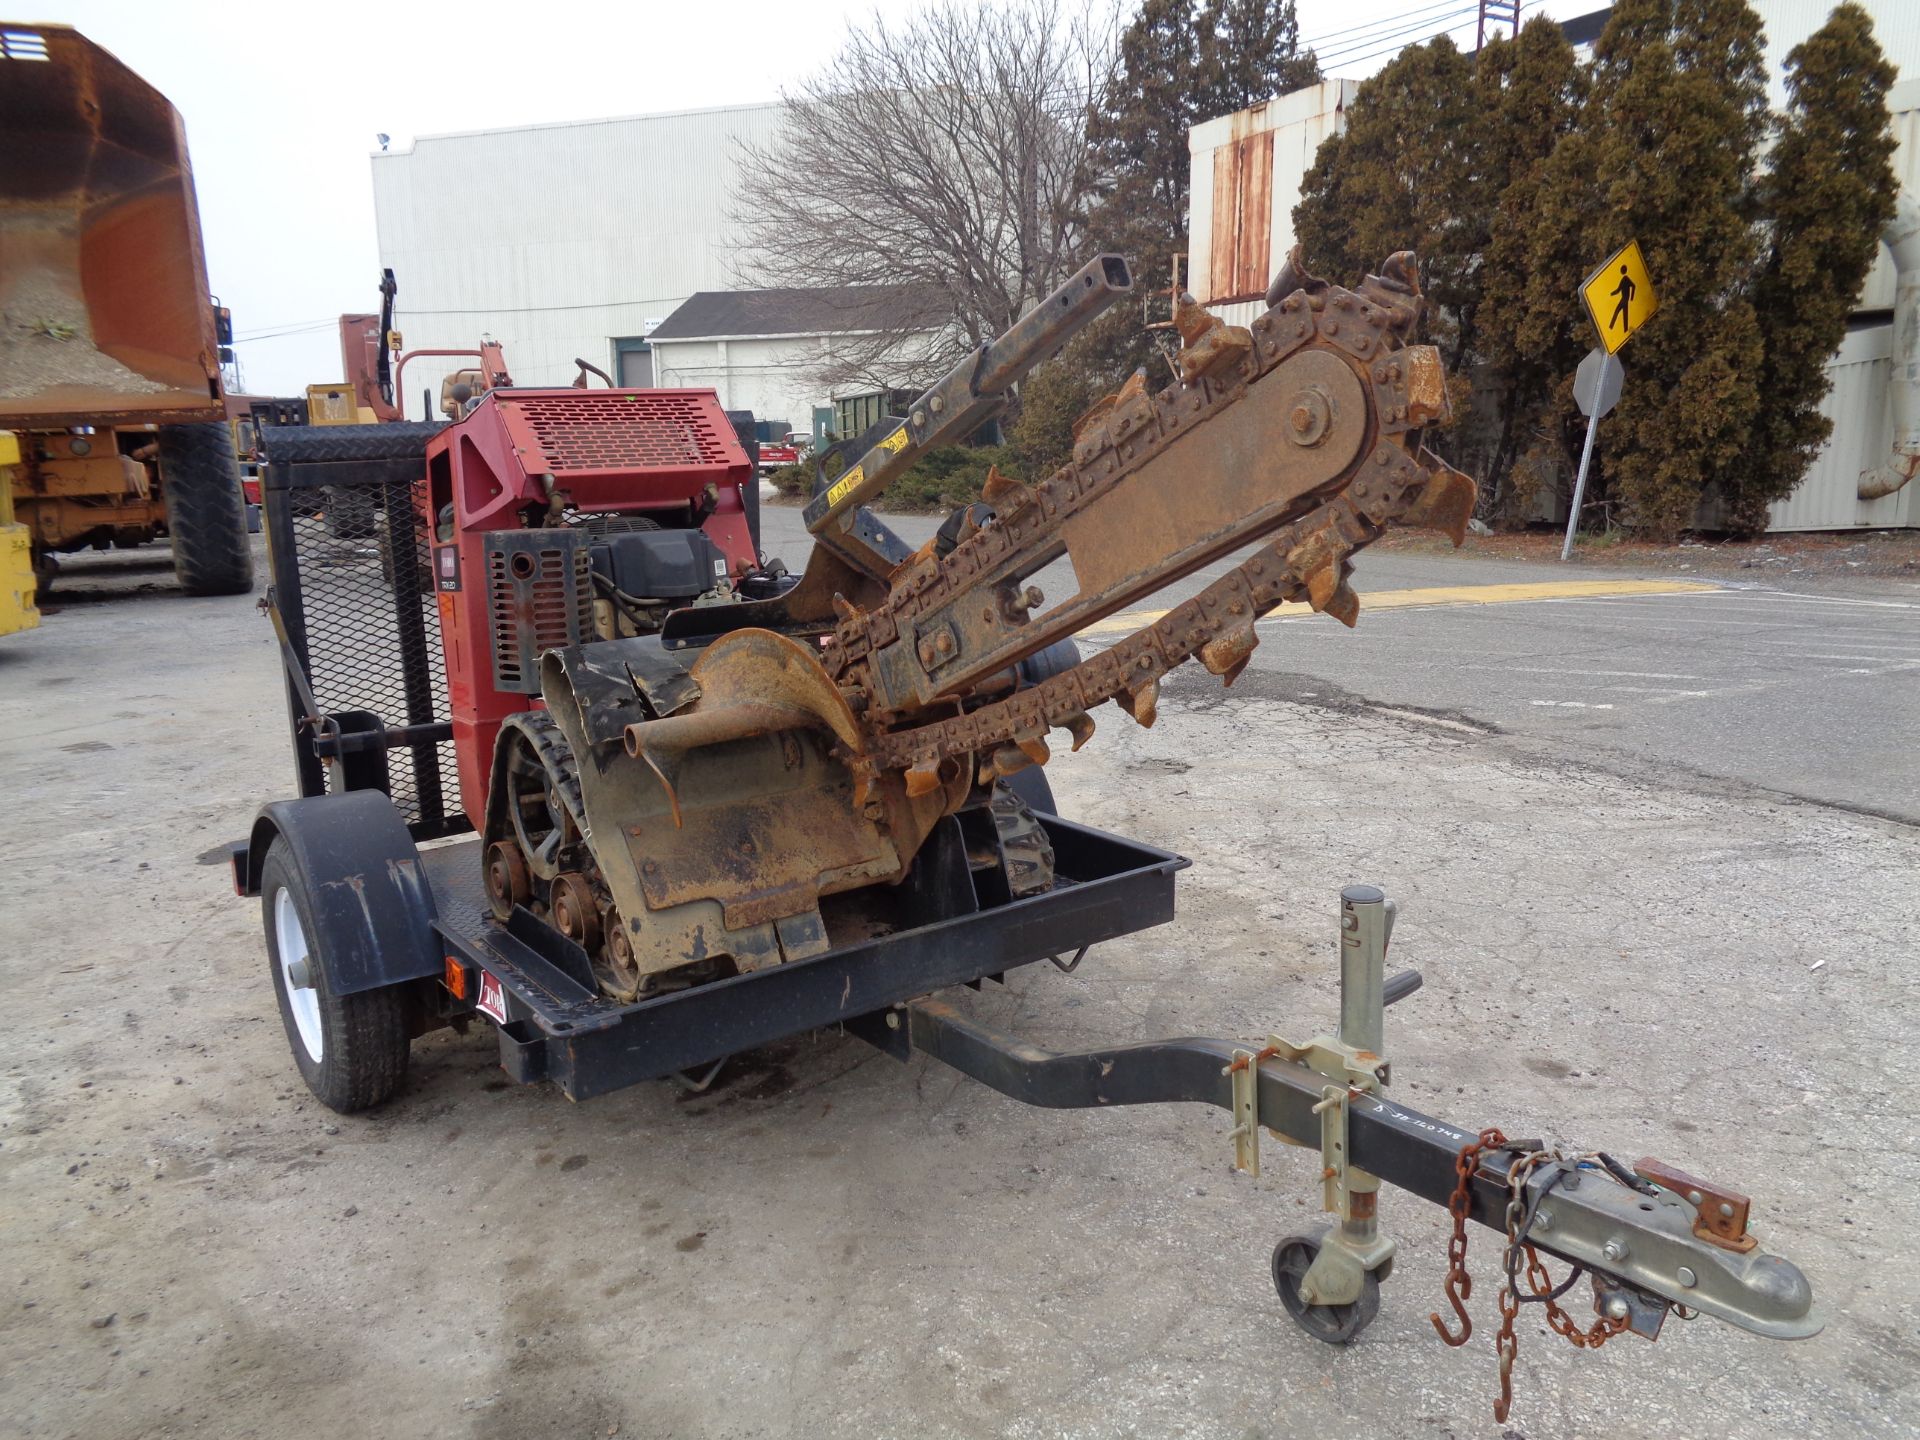 2014 Toro TRX20 Trencher with Trailer - Image 13 of 19